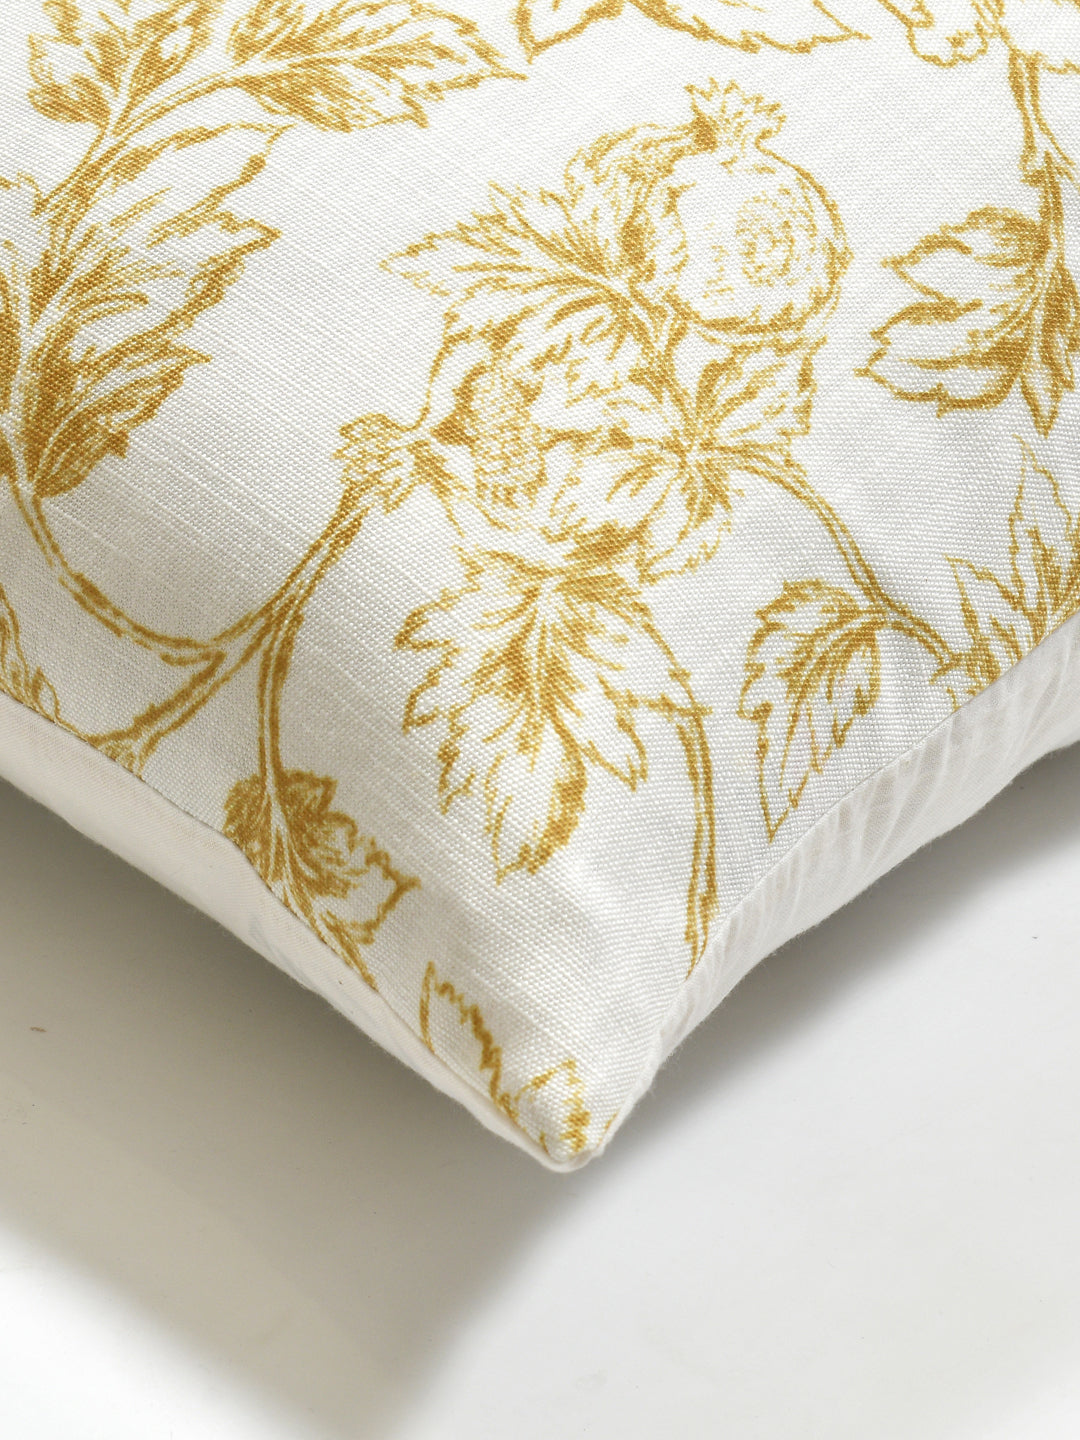 Cushion Covers Set Of 2; Yellow Flowers